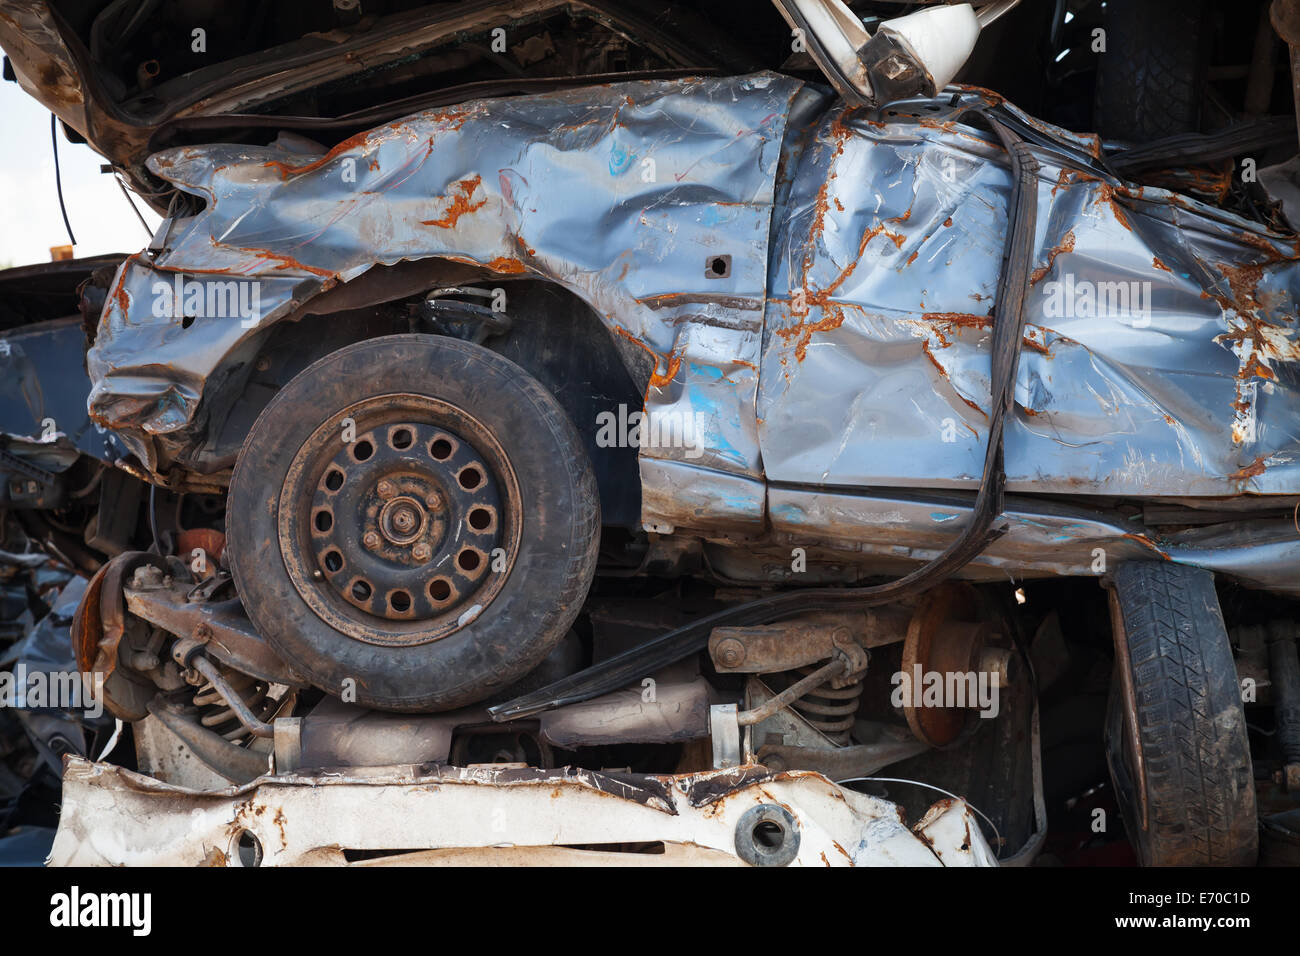 Fragment of stacked cars dumb in junkyard Stock Photo